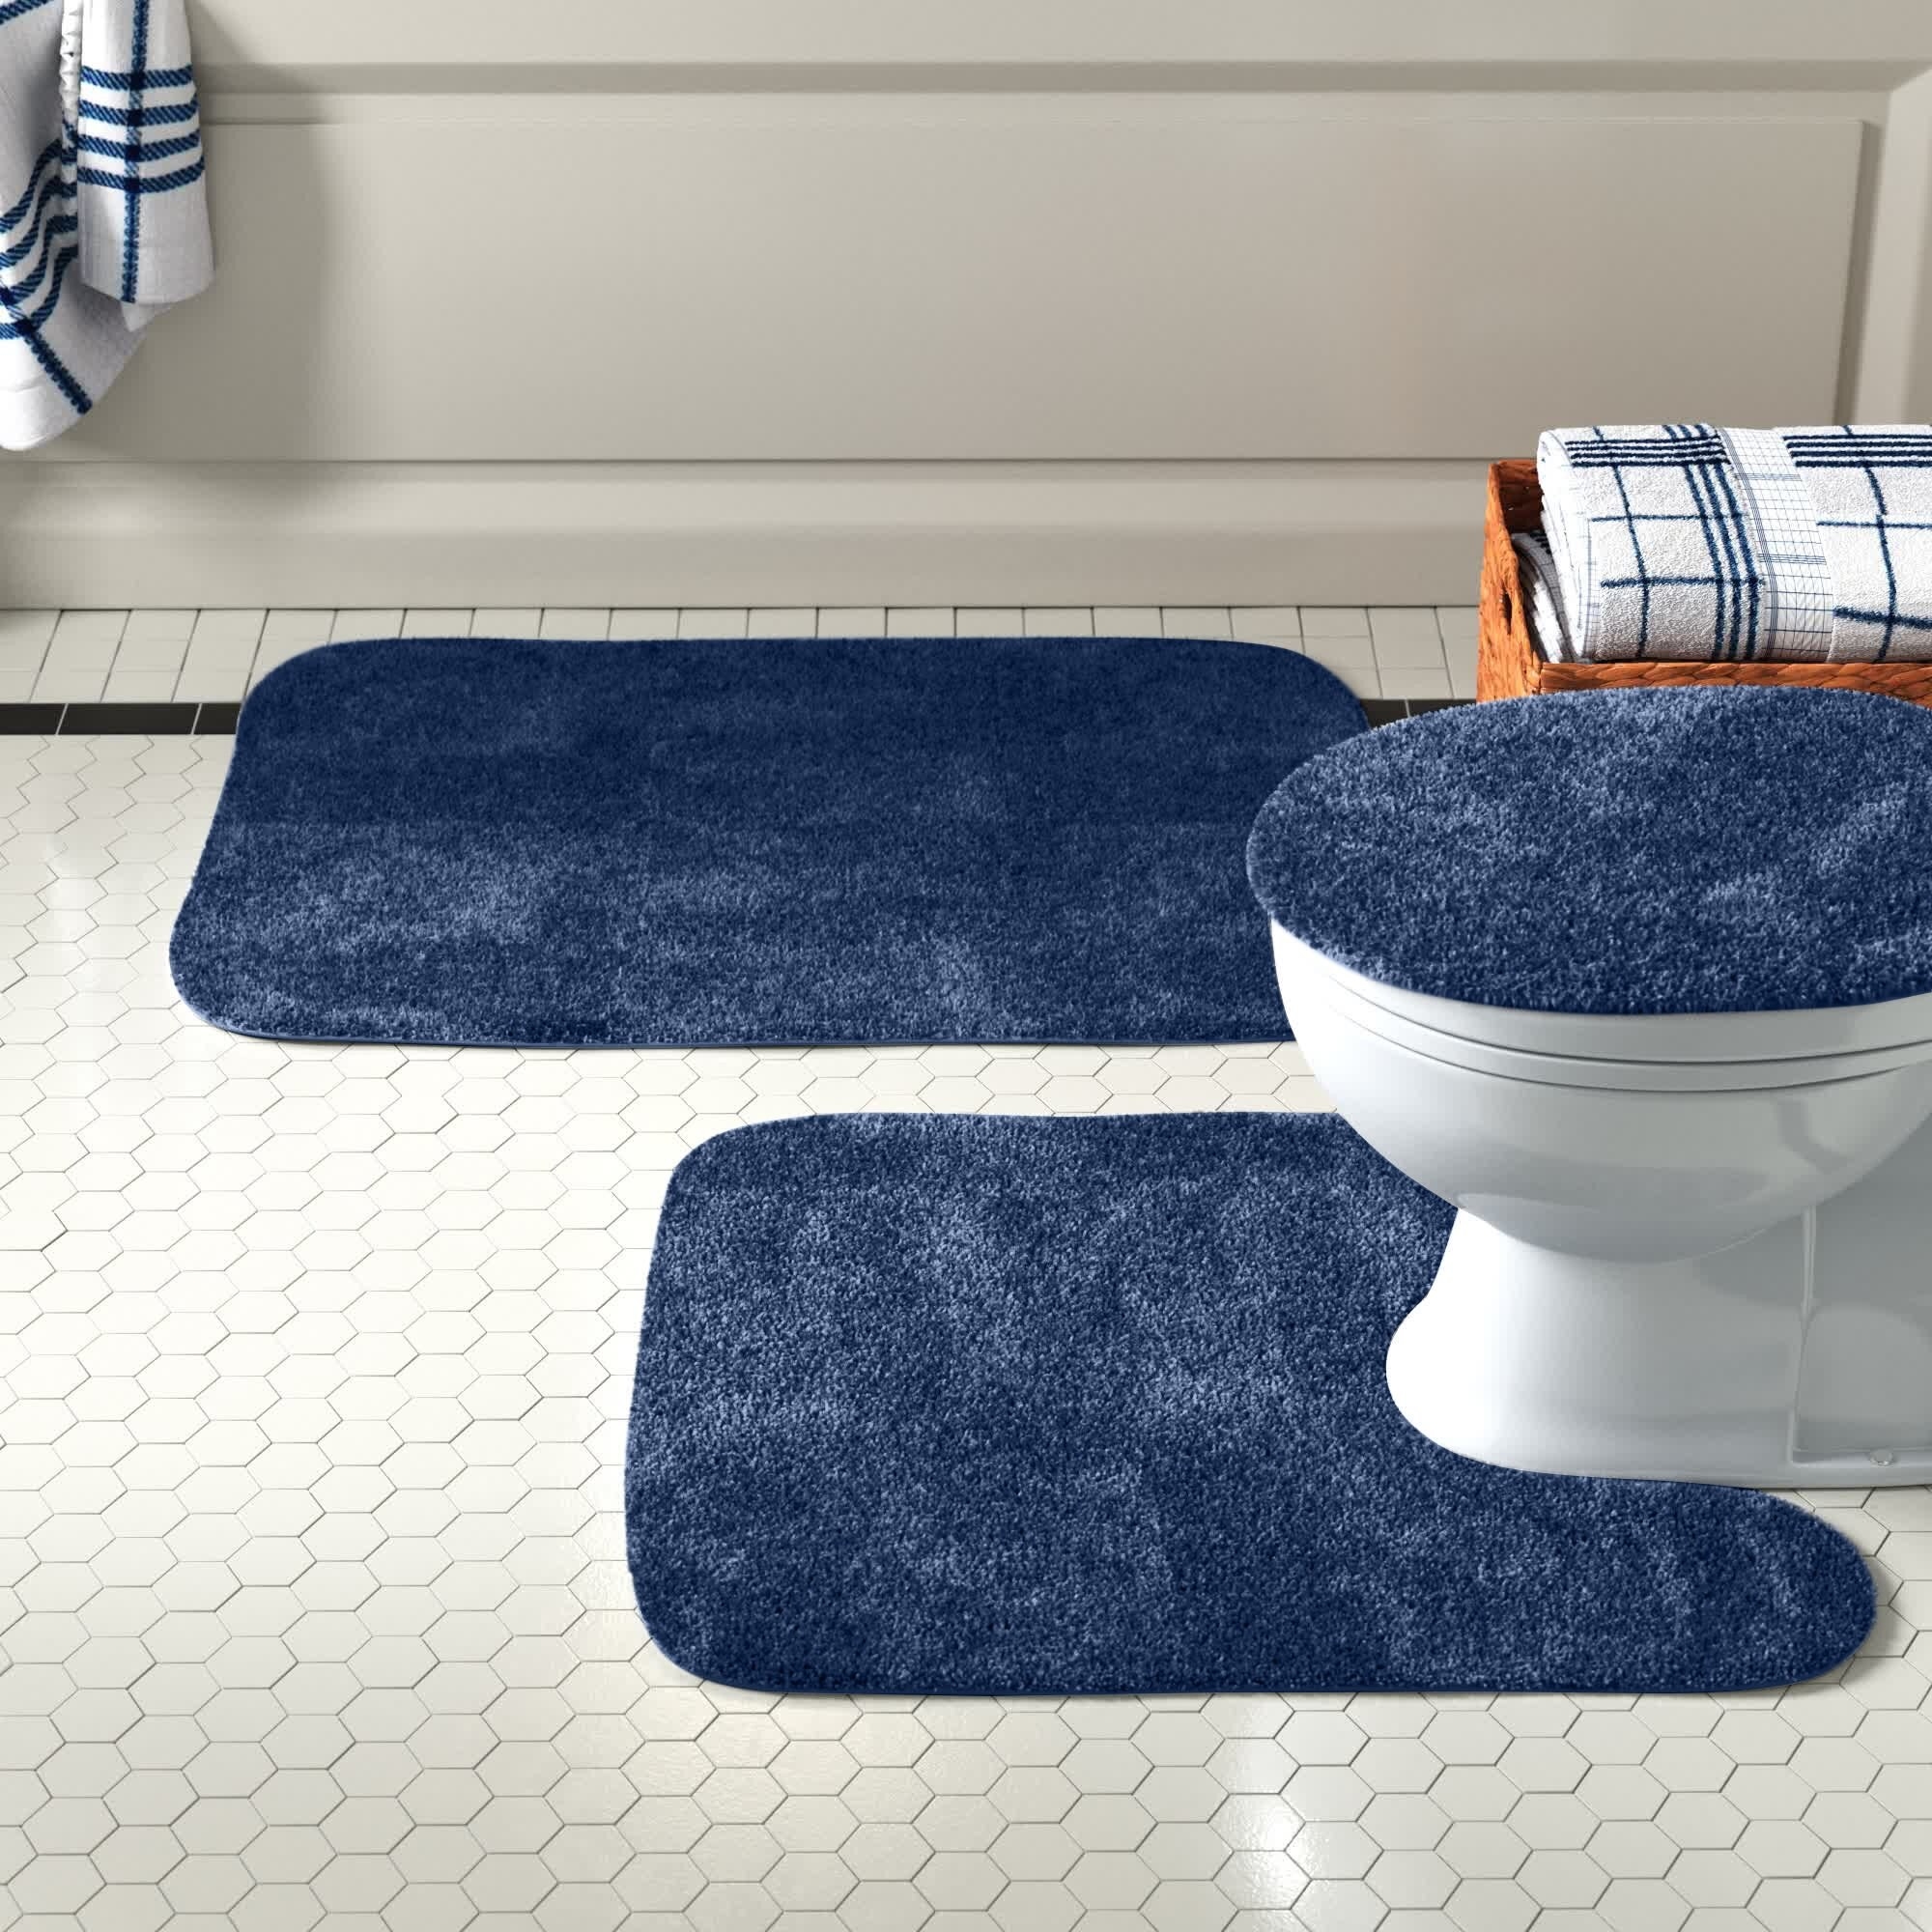 Blue bath rug set underneath toilet, on seat and by shower